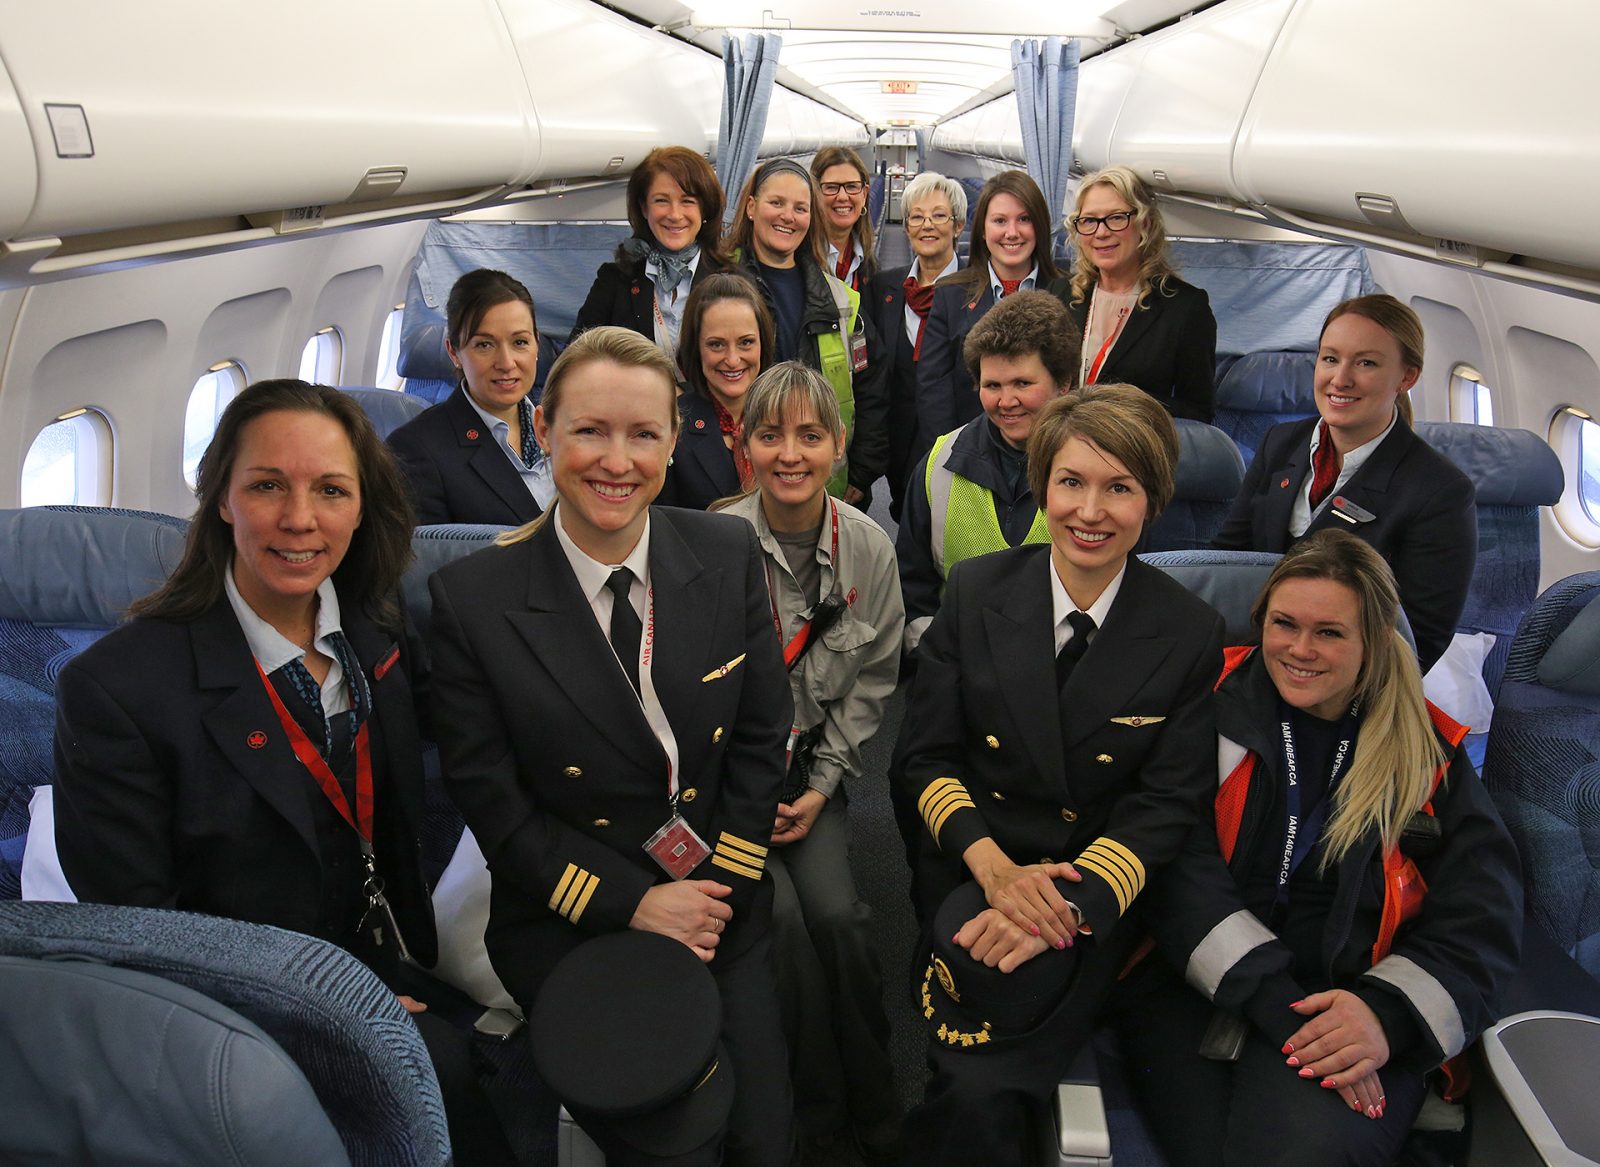 A Union Accused Air Canada of Discrimination Against Female Flight Attendants on International Women's DayA Union Accused Air Canada of Discrimination Against Female Flight Attendants on International Women's Day